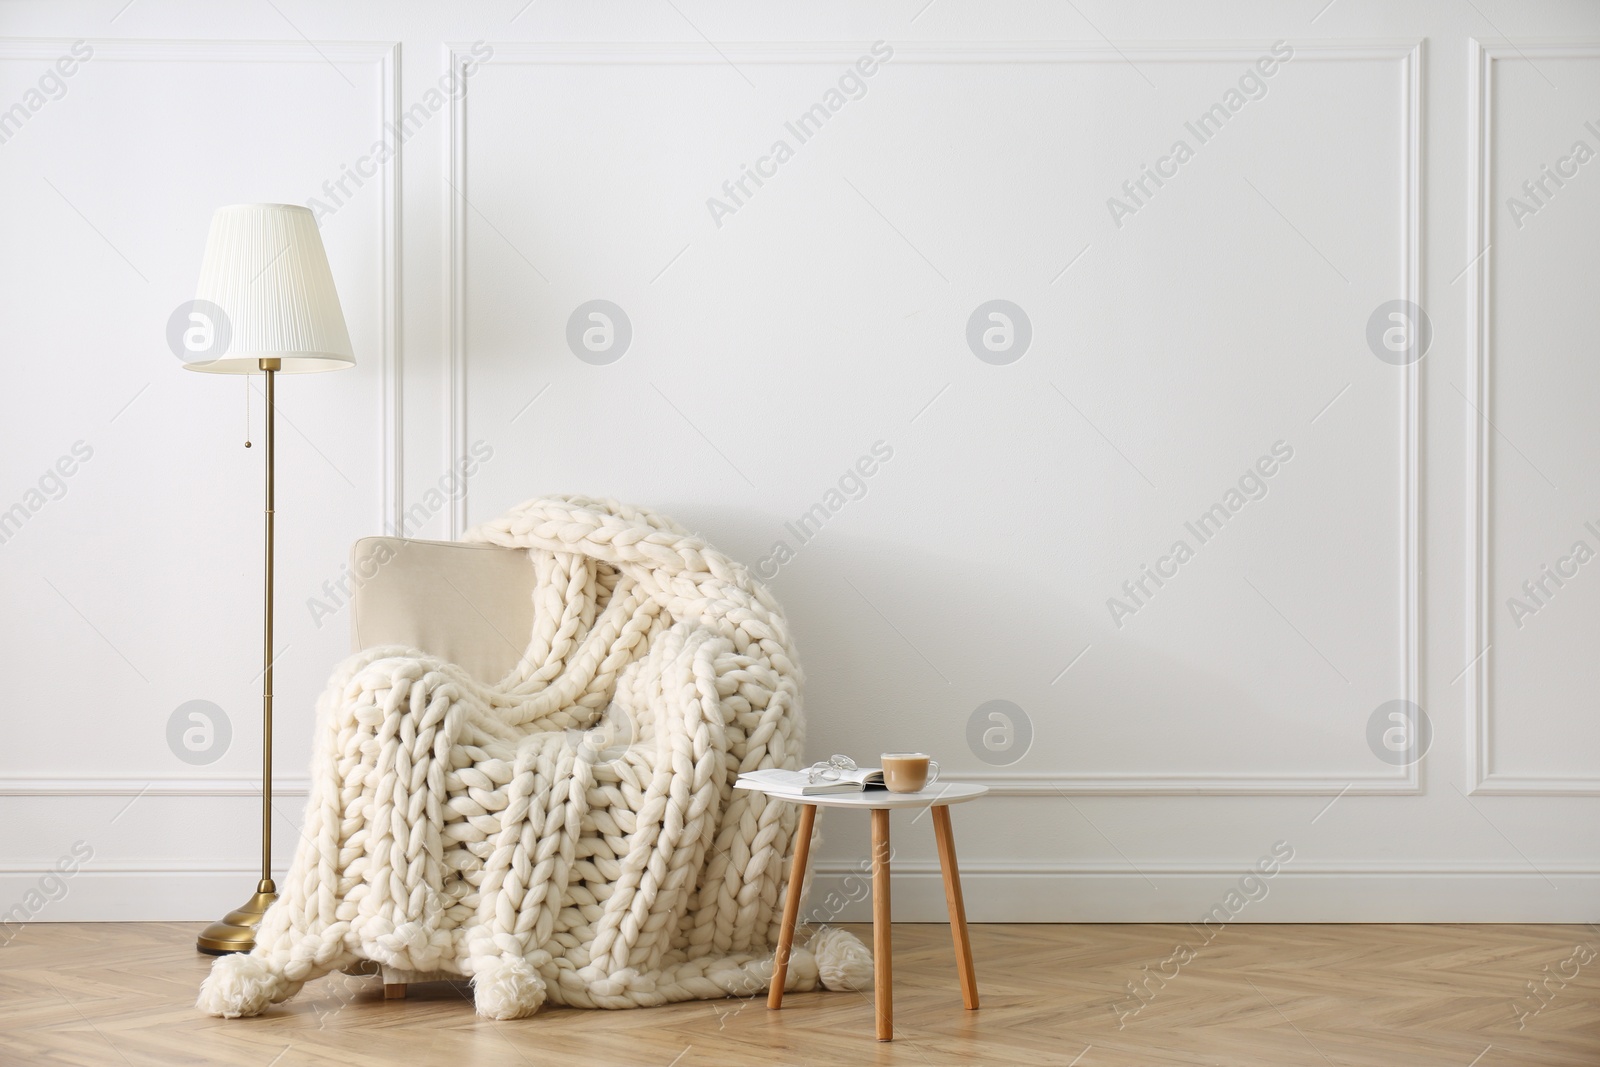 Photo of Knitted merino wool plaid on armchair in room. Space for text